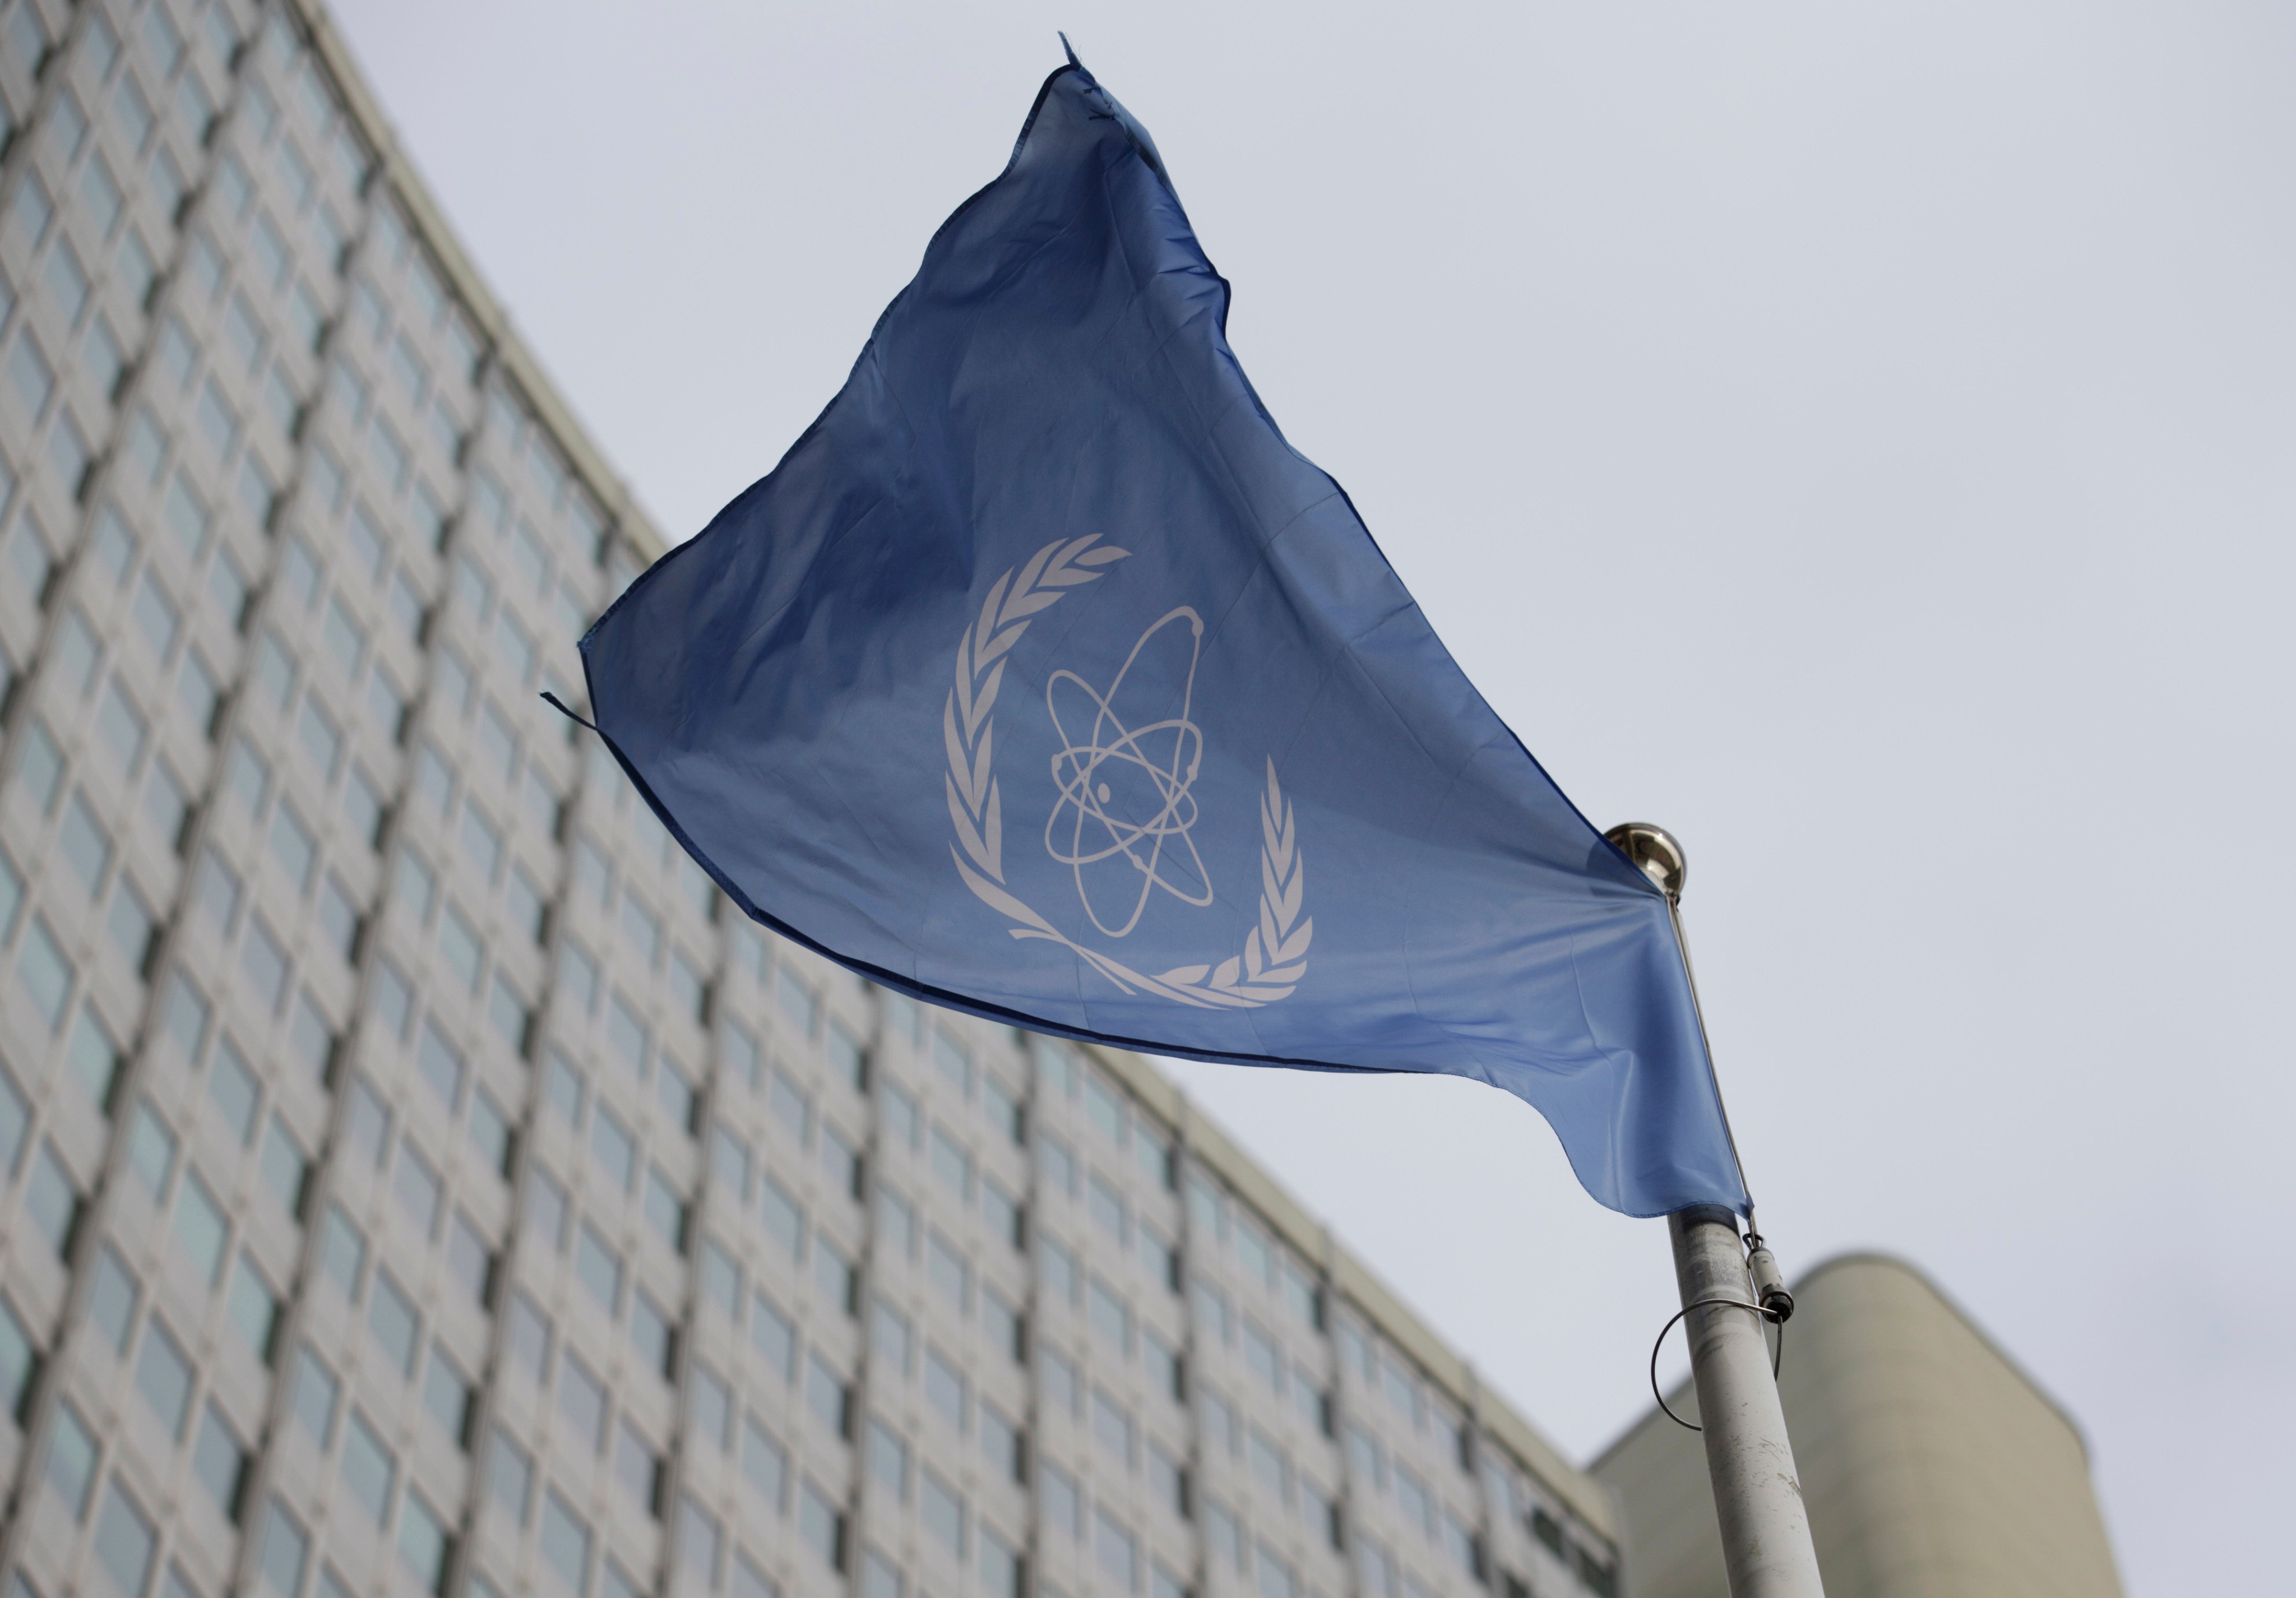 The flag of the International Atomic Energy Agency (IAEA). North Korea on Monday denounced the IAEA for joining a US-led pressure campaign over its nuclear programmes. Photo: AP